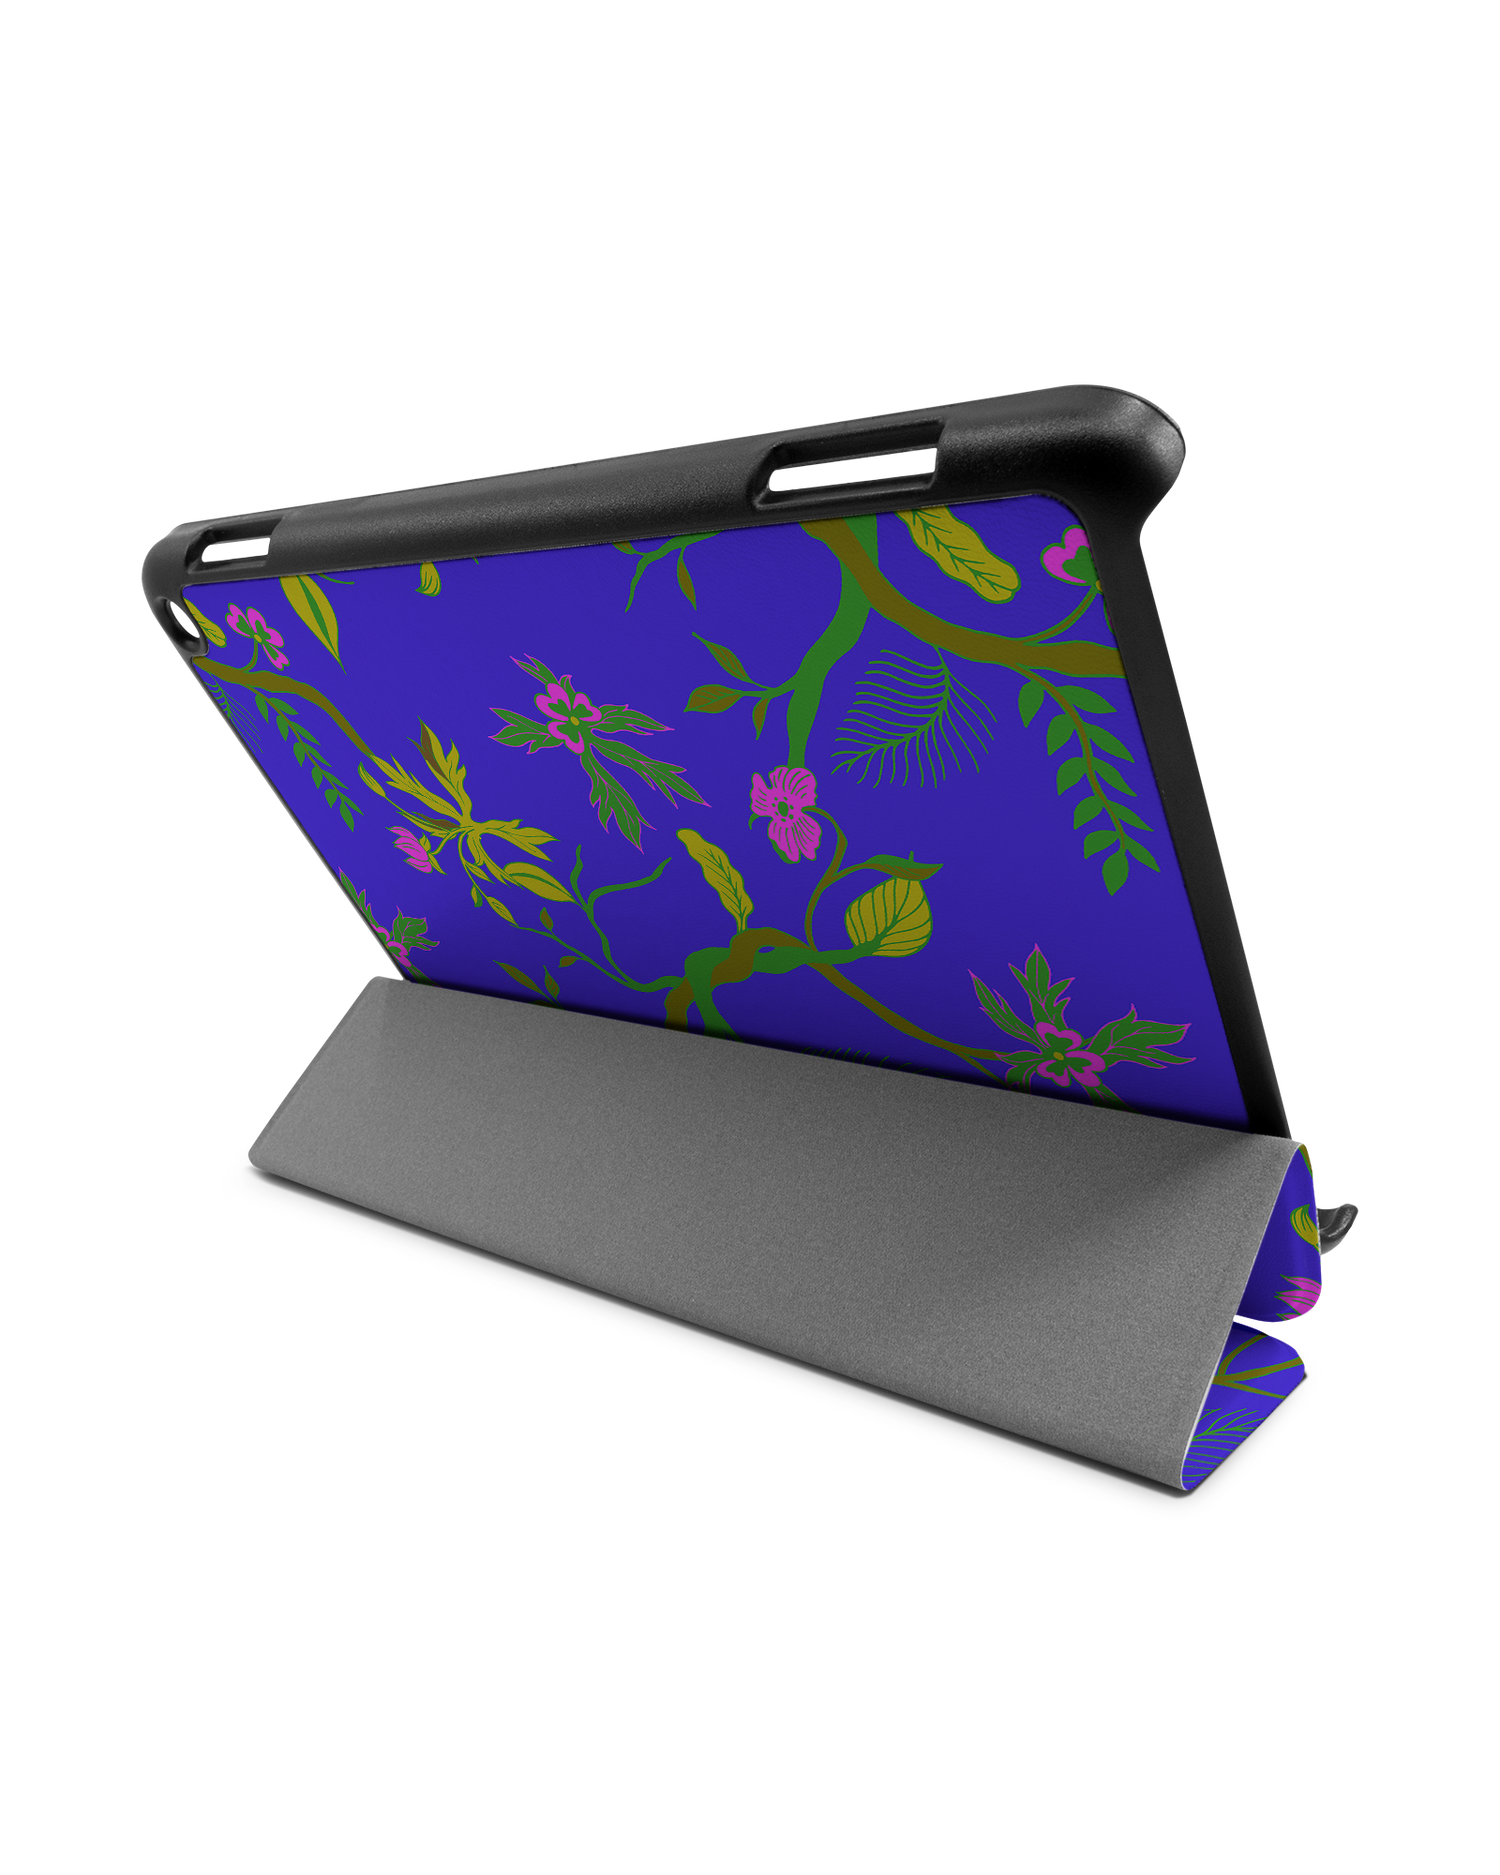 Ultra Violet Floral Tablet Smart Case for Amazon Fire HD 8 (2022), Amazon Fire HD 8 Plus (2022), Amazon Fire HD 8 (2020), Amazon Fire HD 8 Plus (2020): Used as Stand